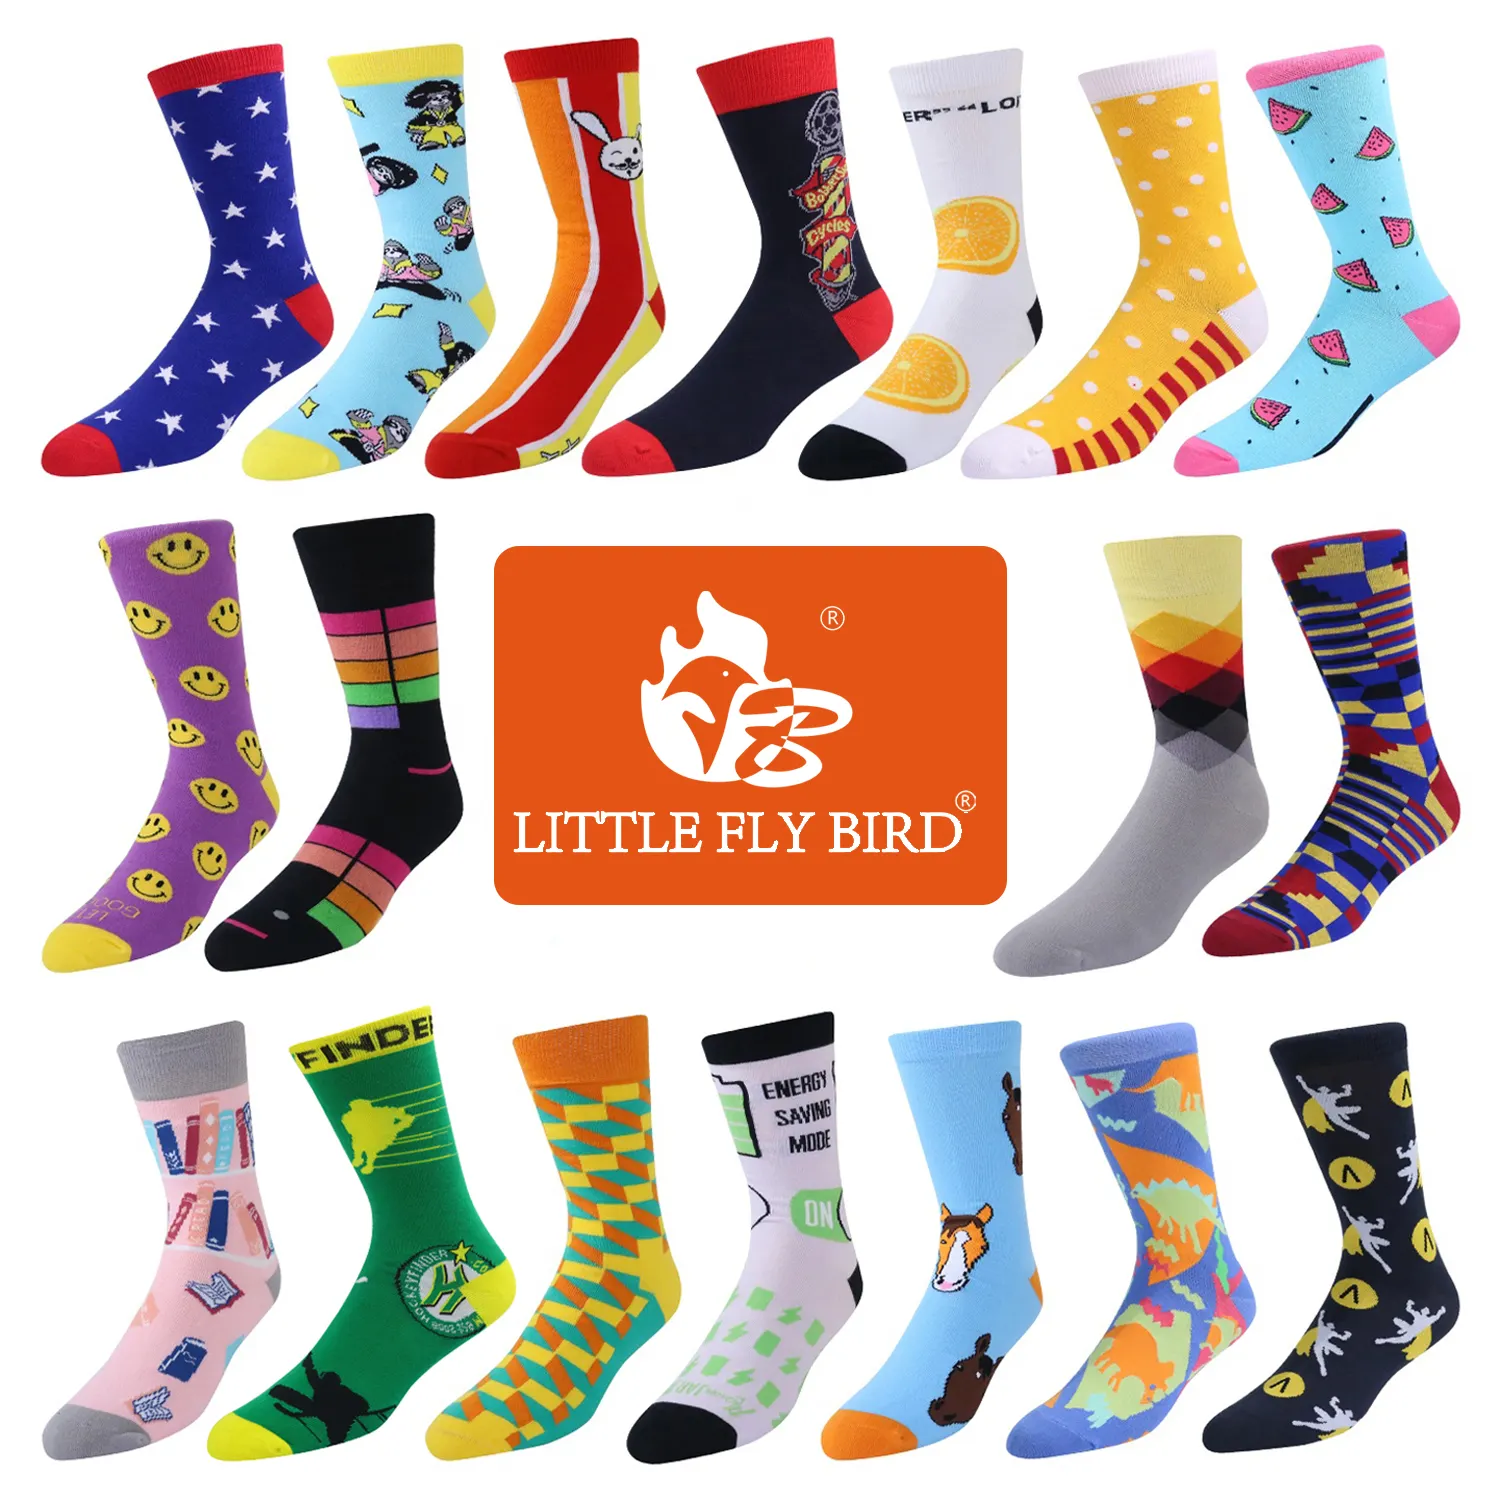 Customized wholesale logo design bamboo socken chaussette high quality fashion colorful happy funny crew cotton men socks